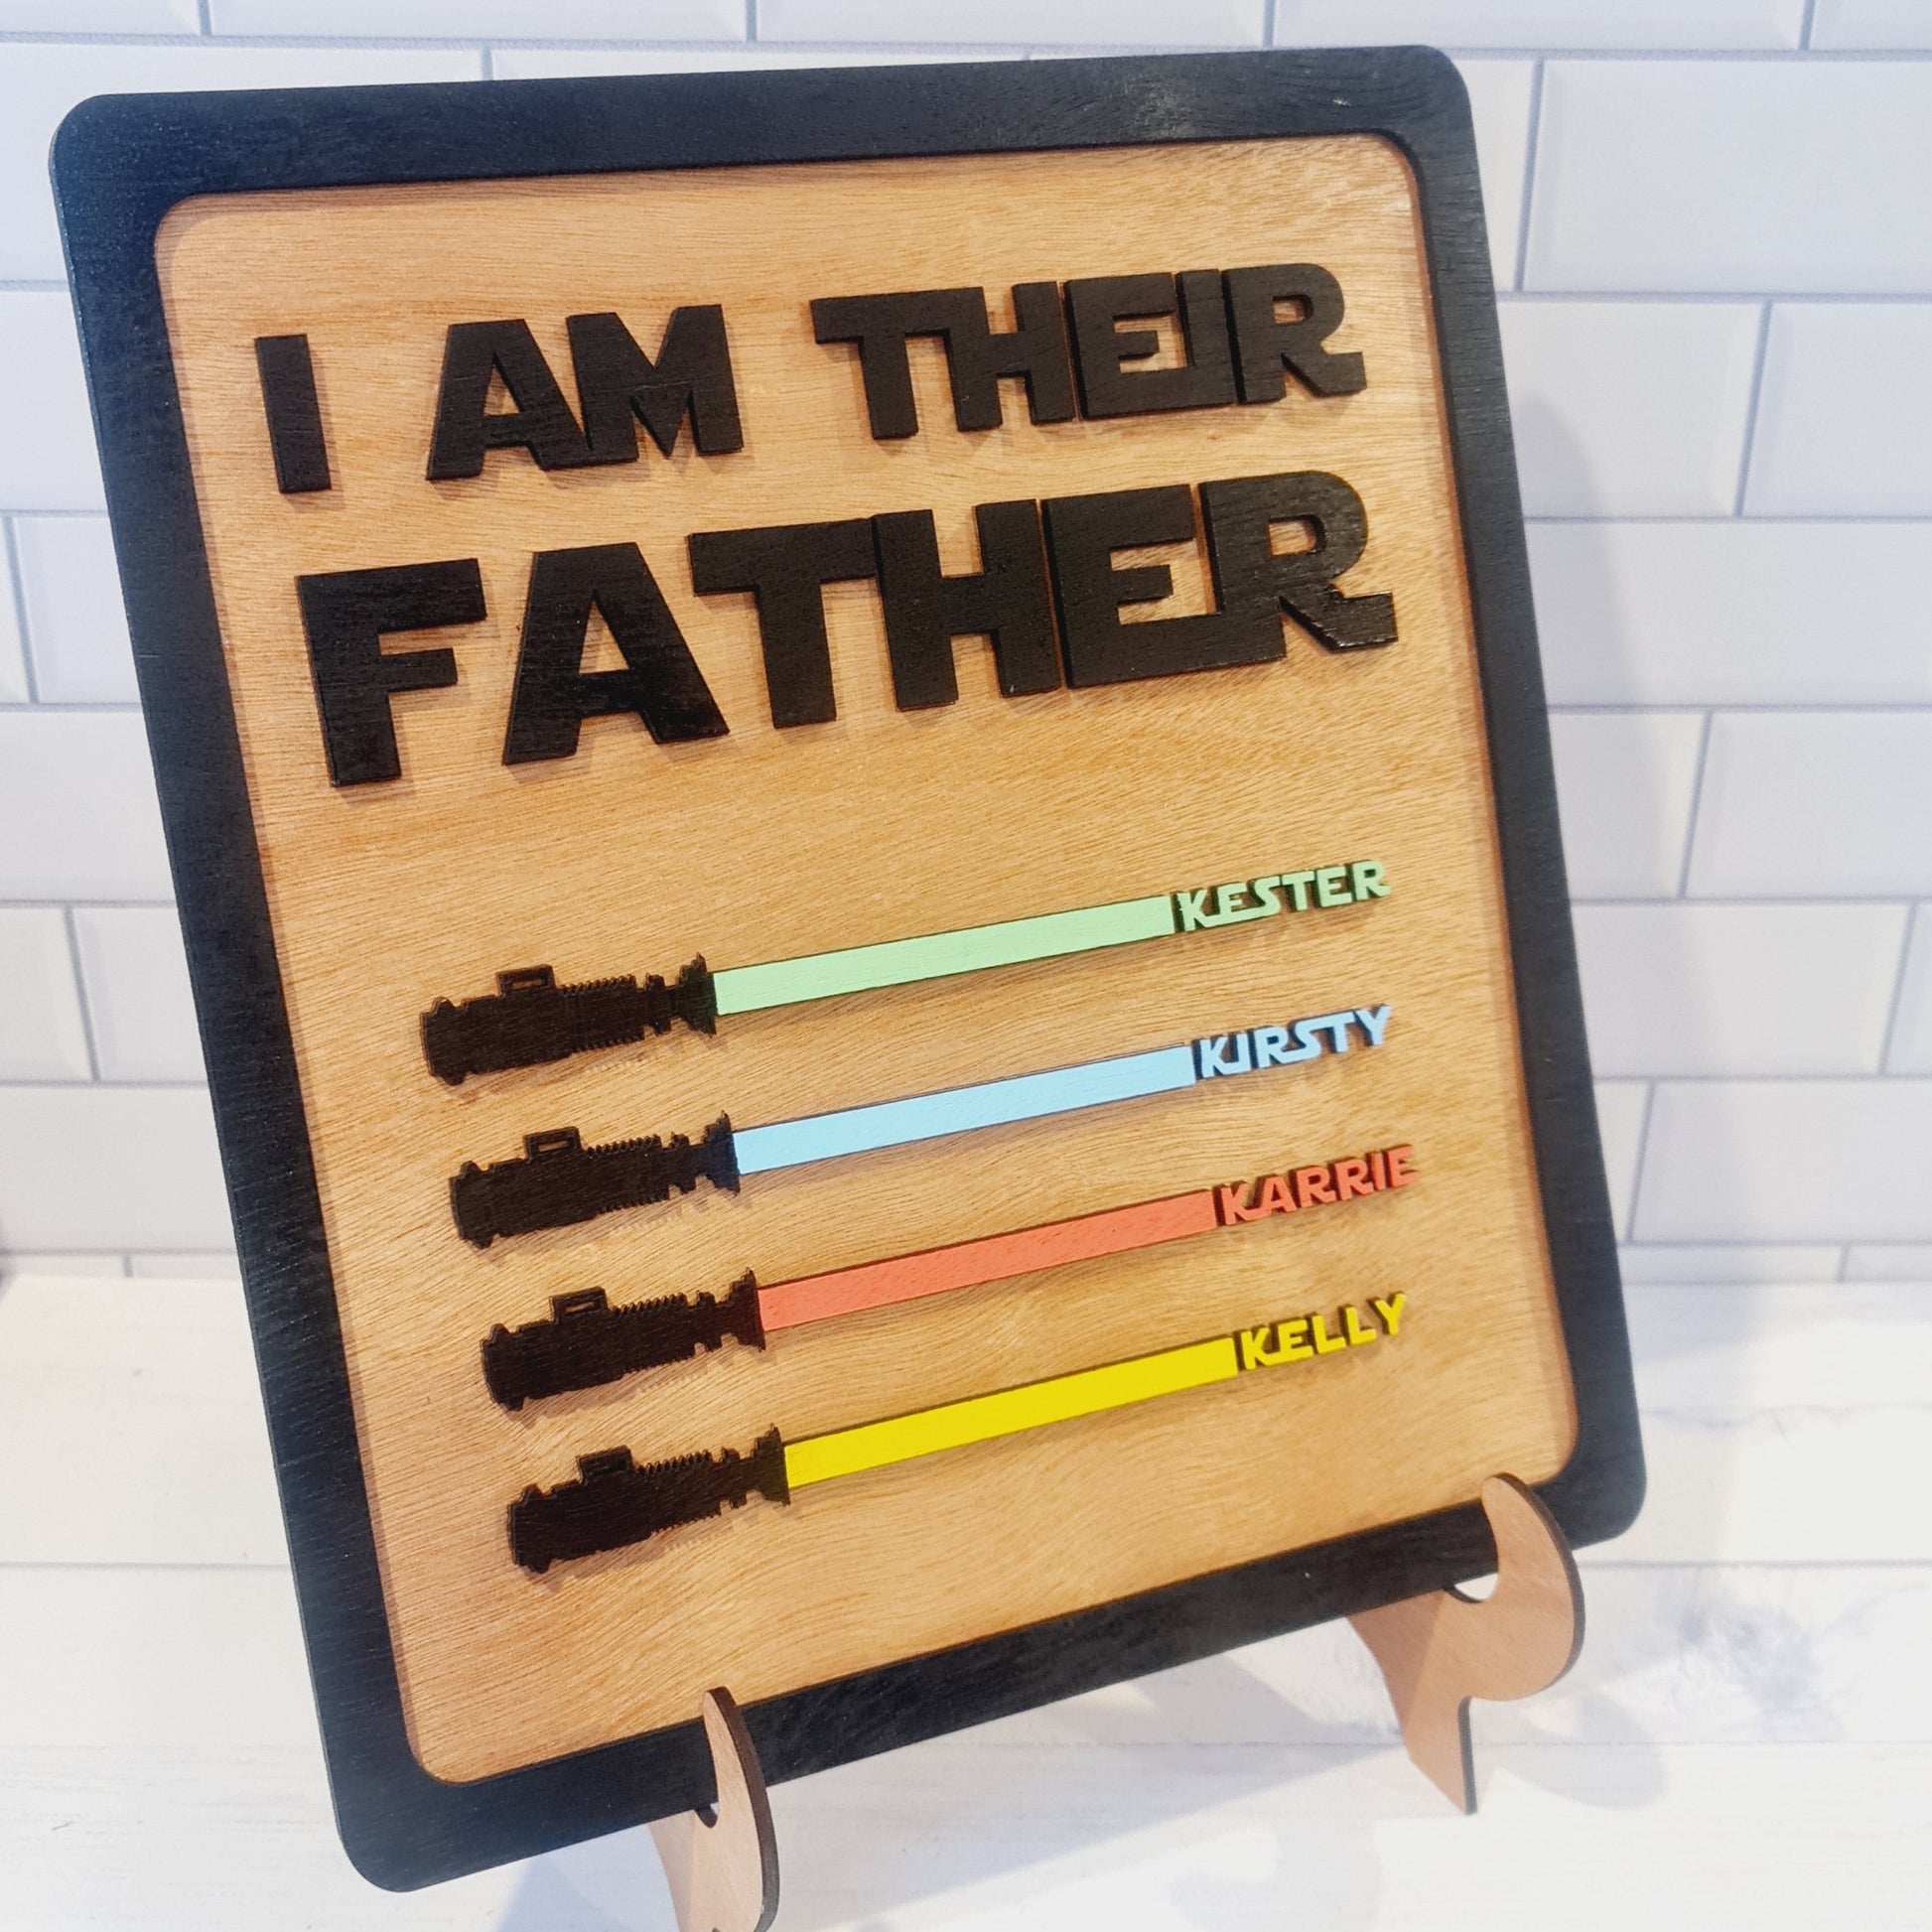 4 name fathers day star wars gift